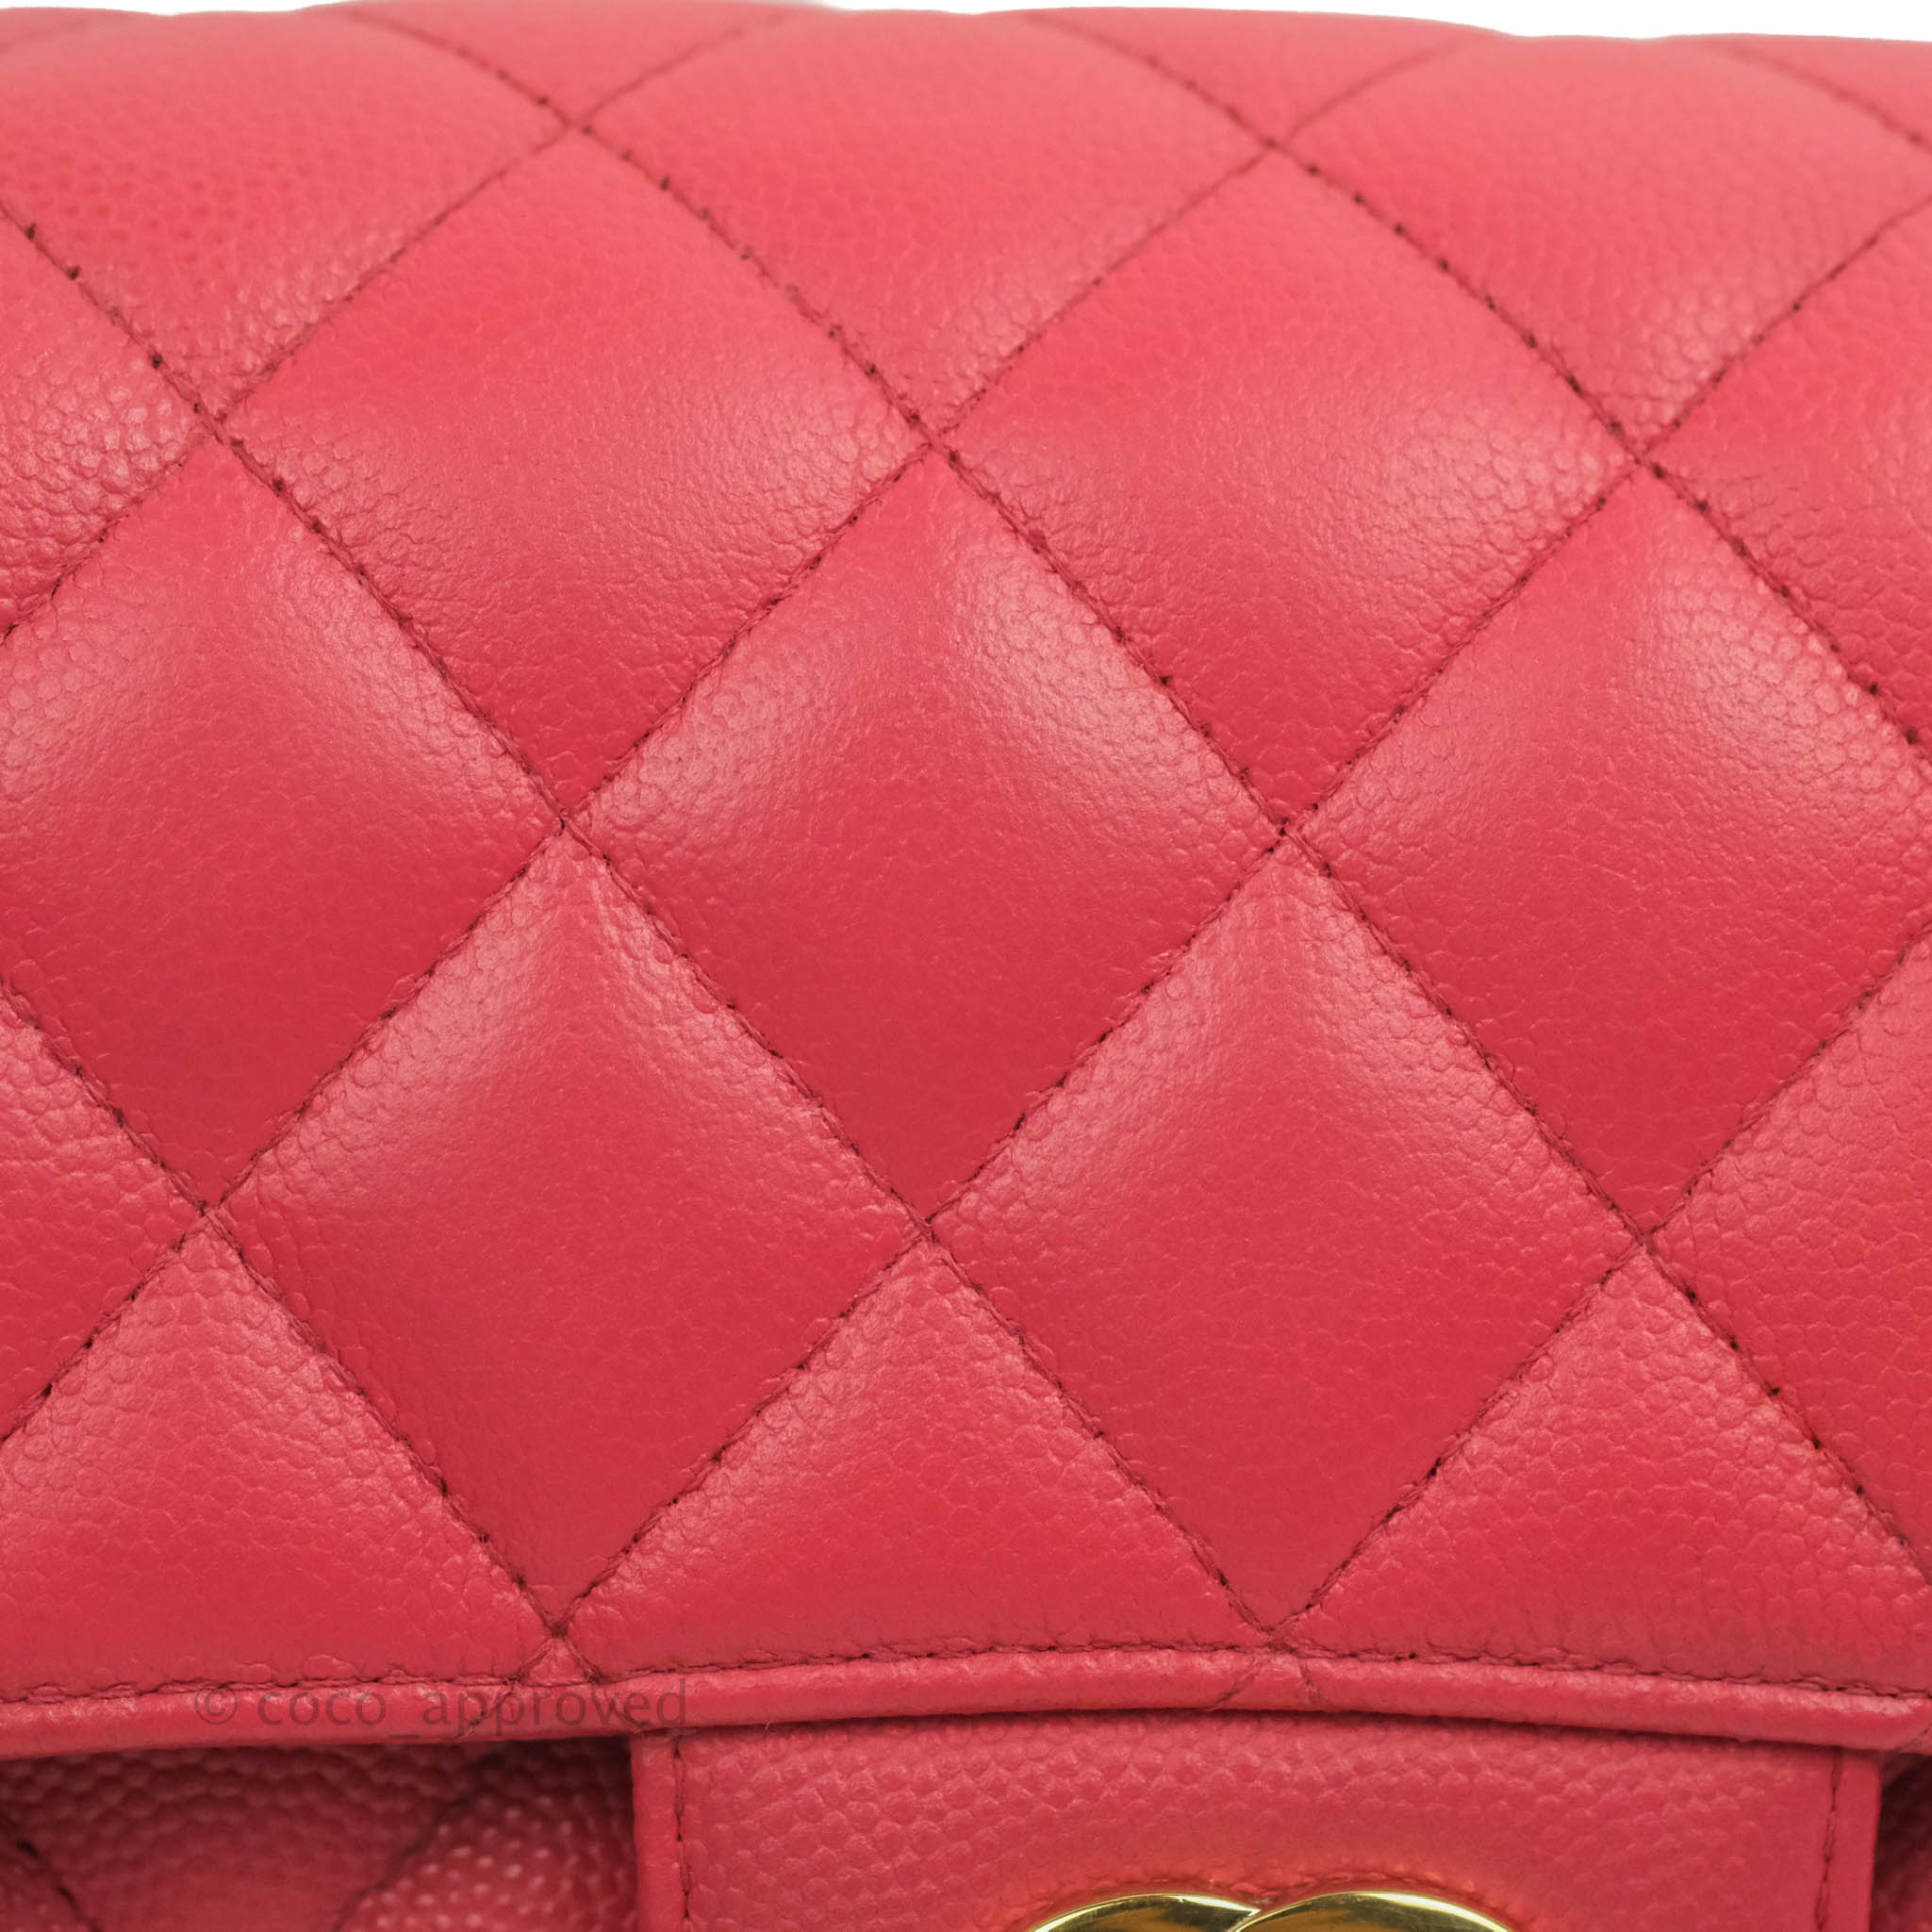 Chanel Quilted Mini Rectangular Flap Pink Caviar Gold Hardware 17C – Coco  Approved Studio